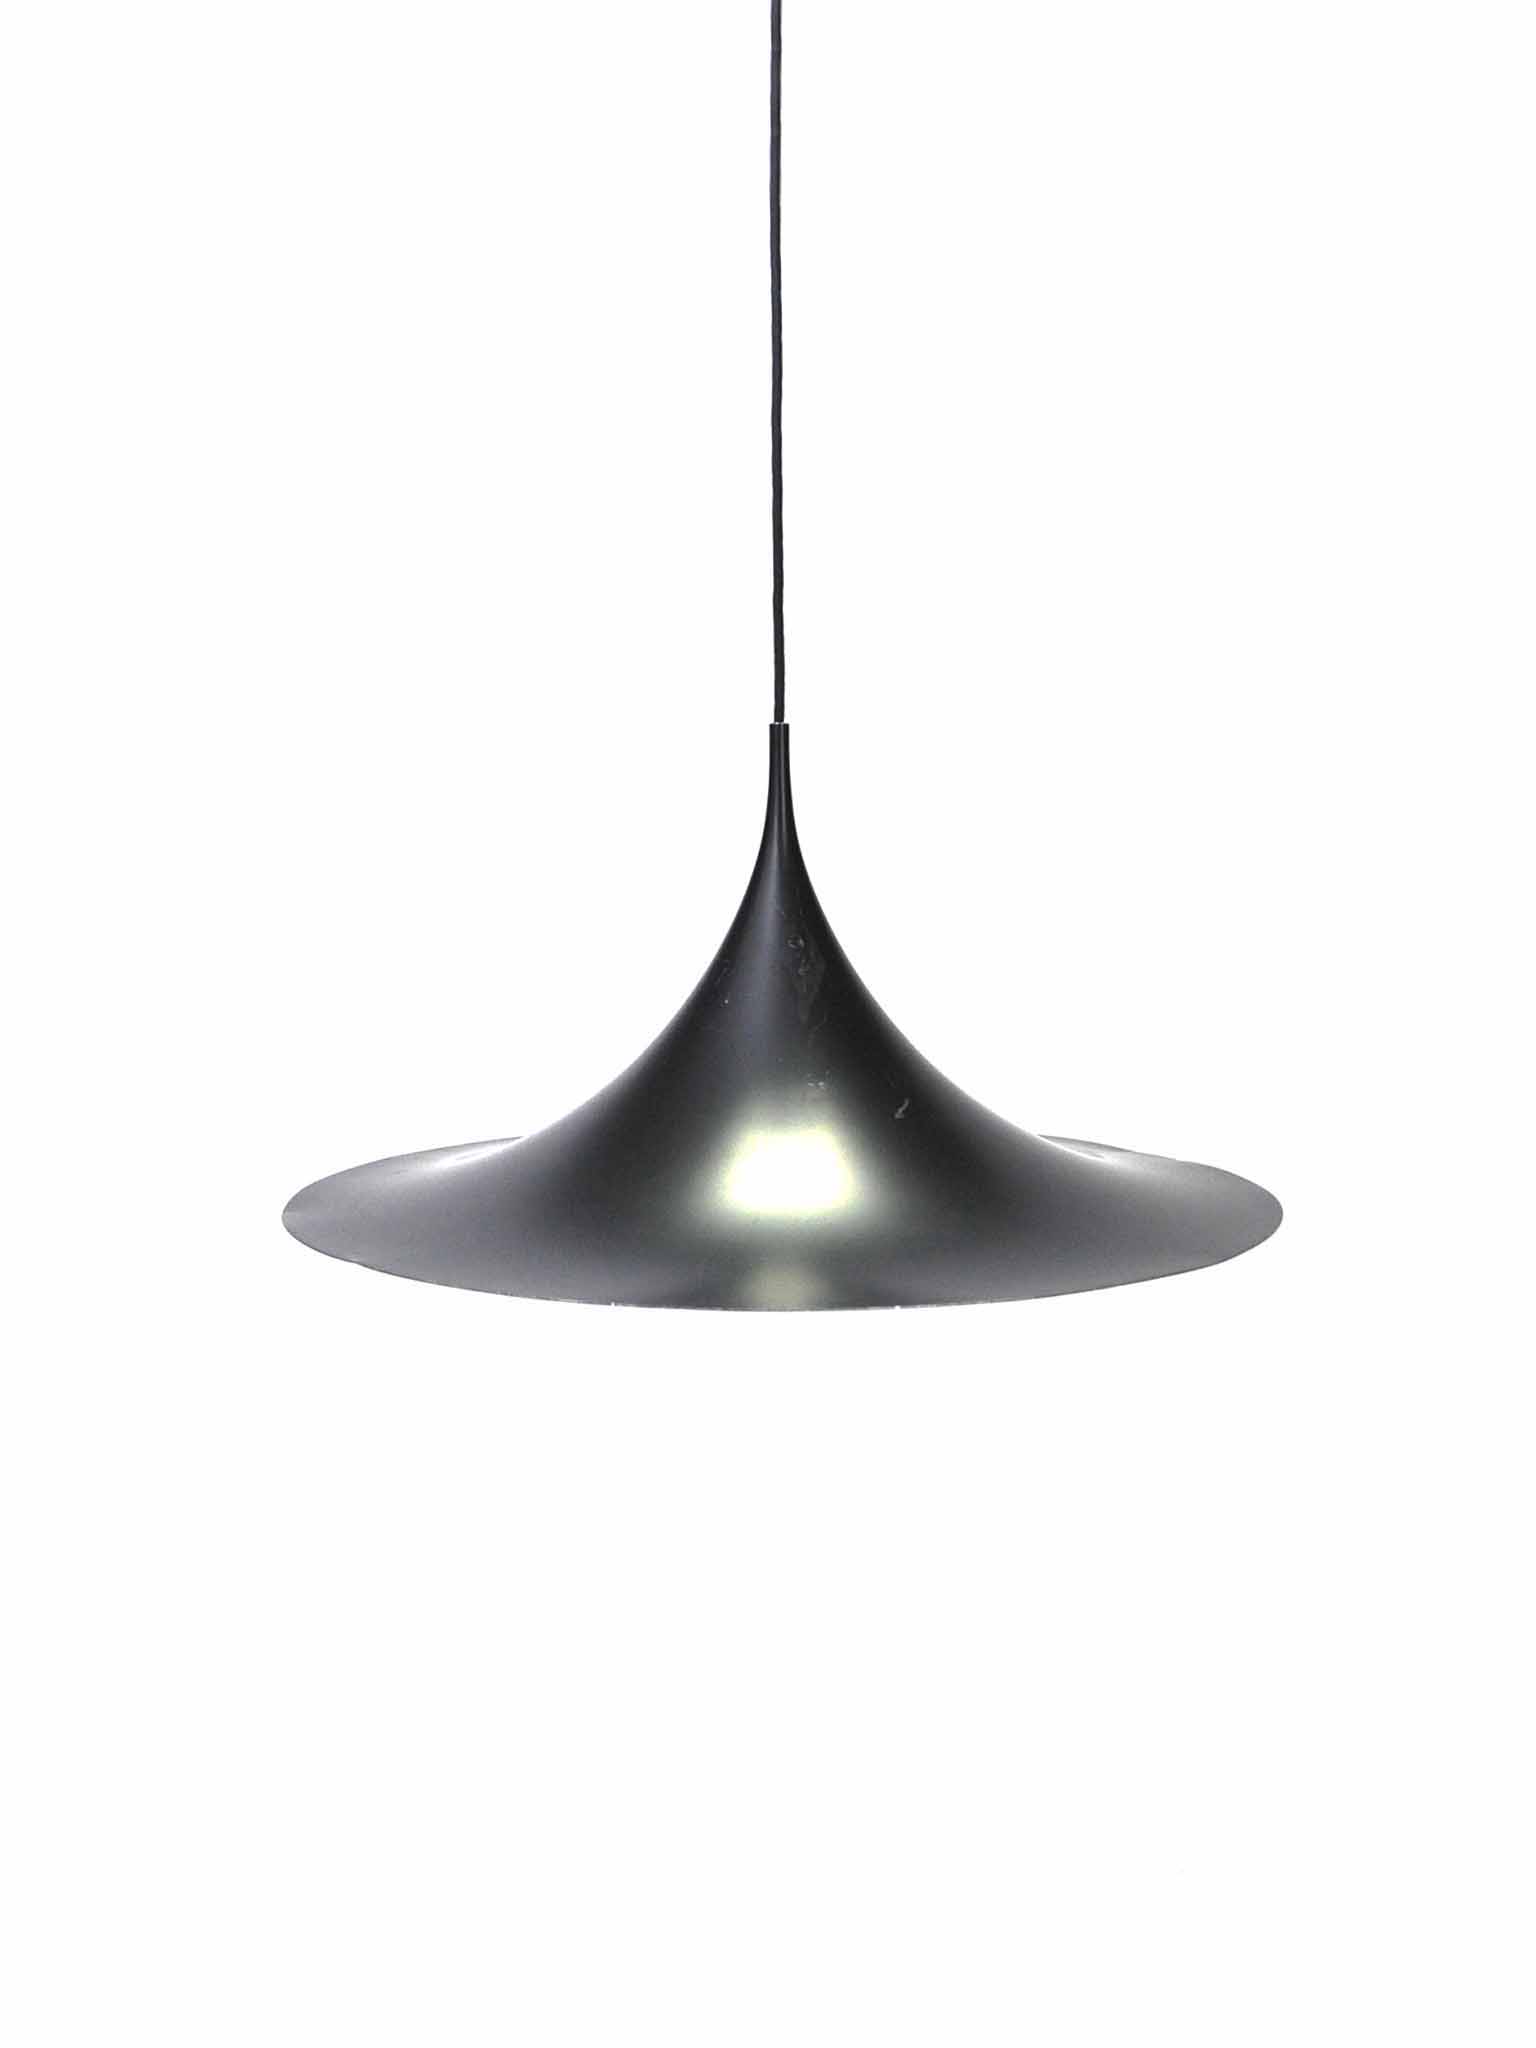 SEMI PENDANT LIGHT BY BONDERUP AND THORUP